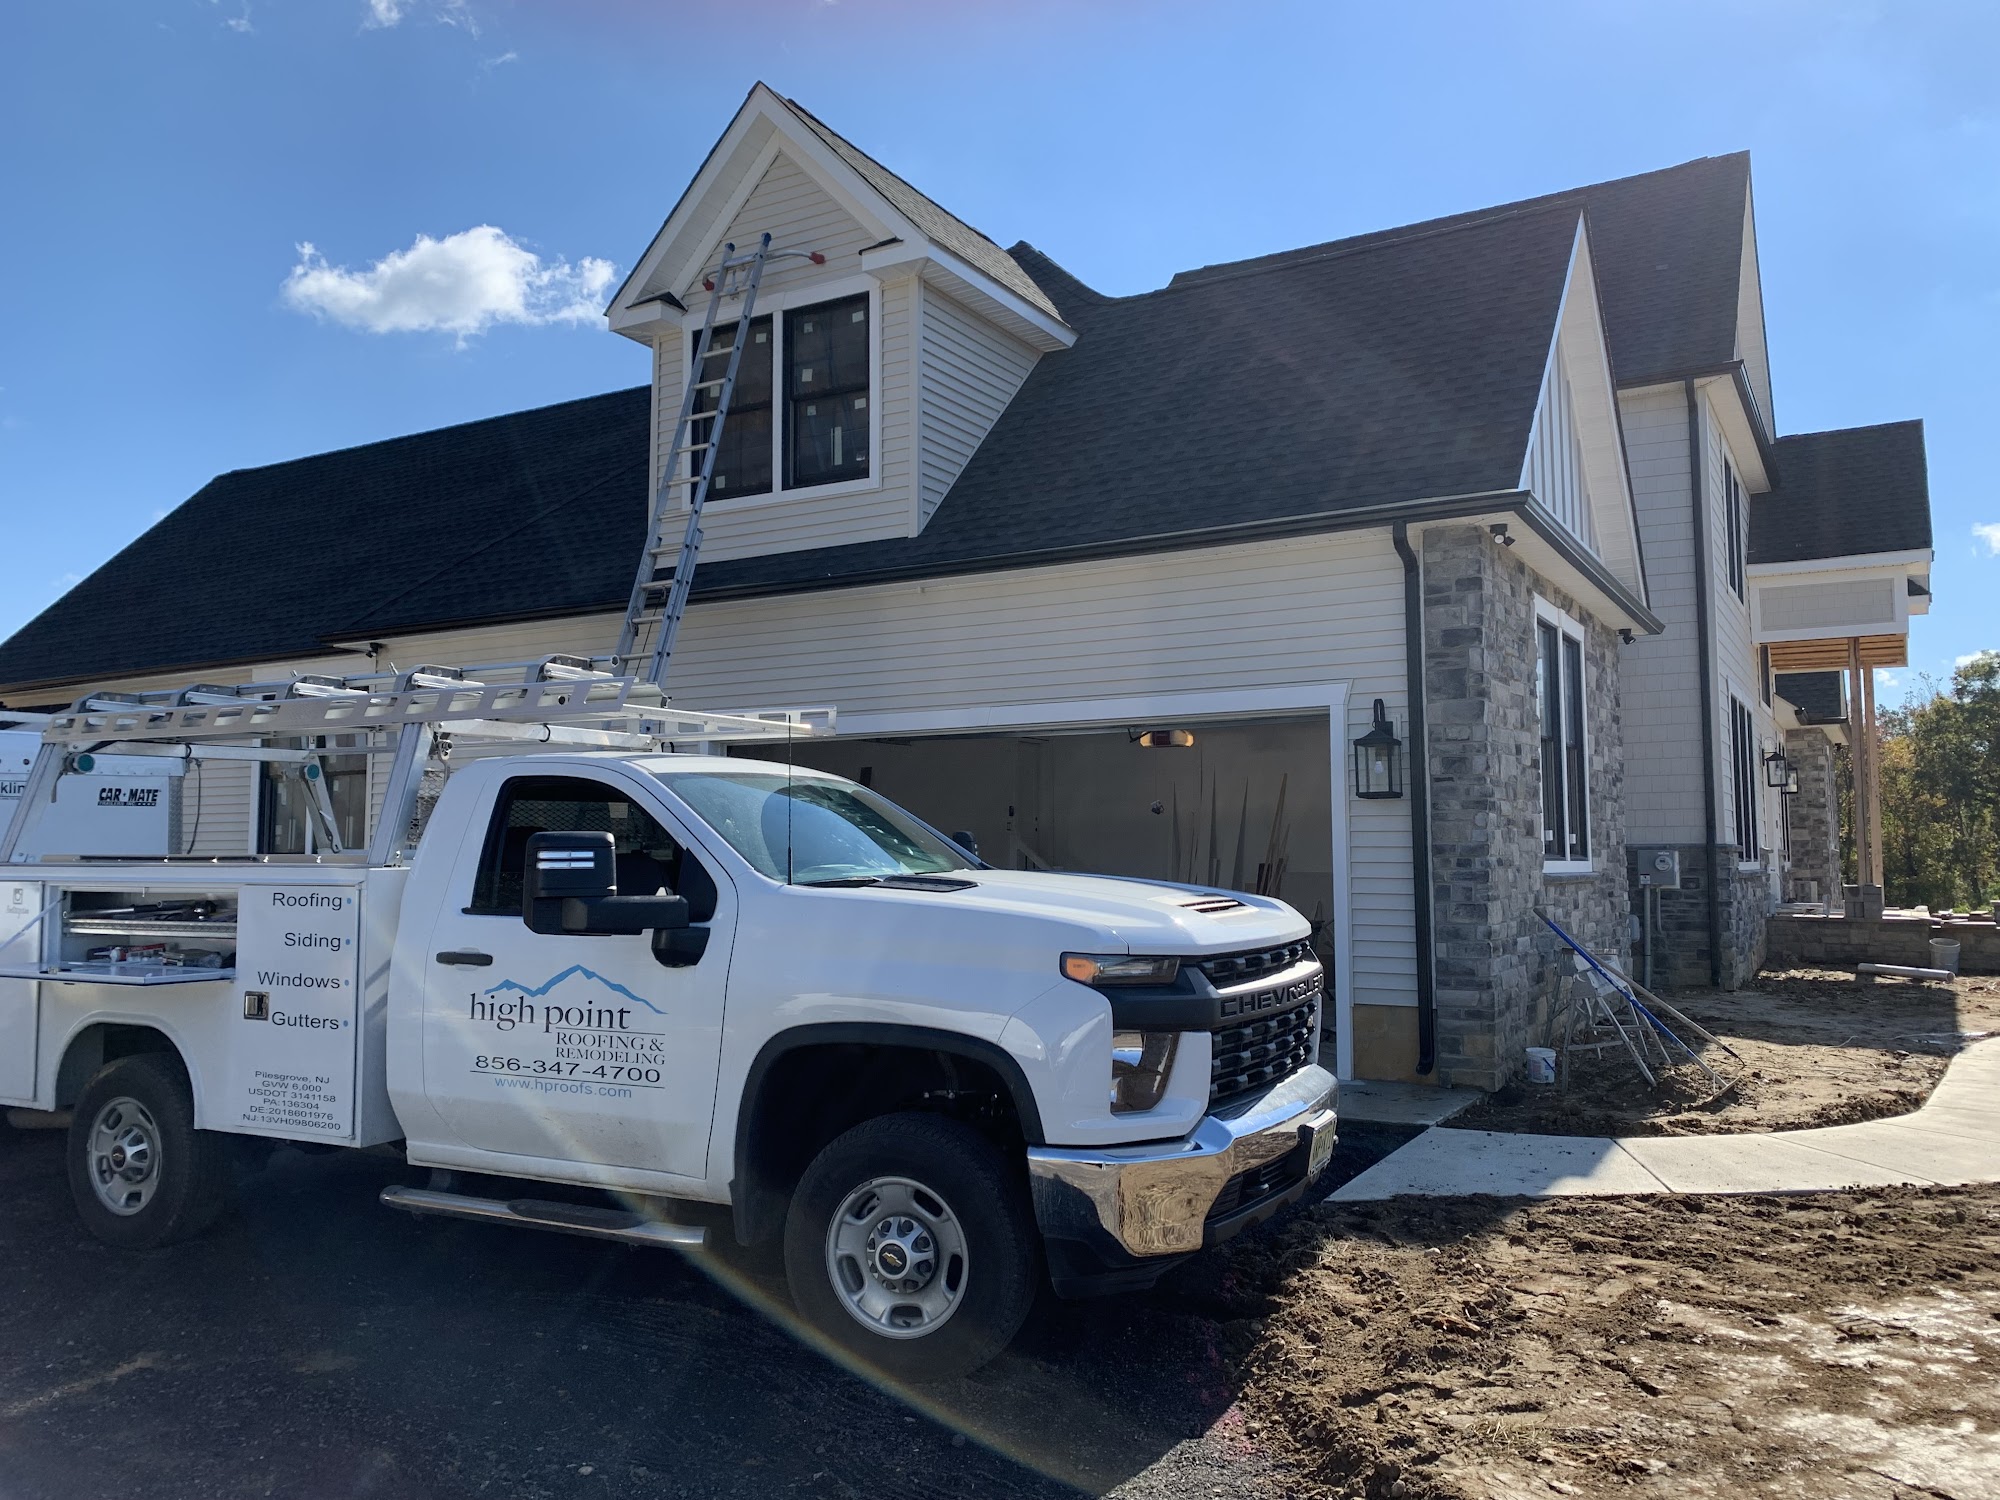 High Point Roofing and Remodeling